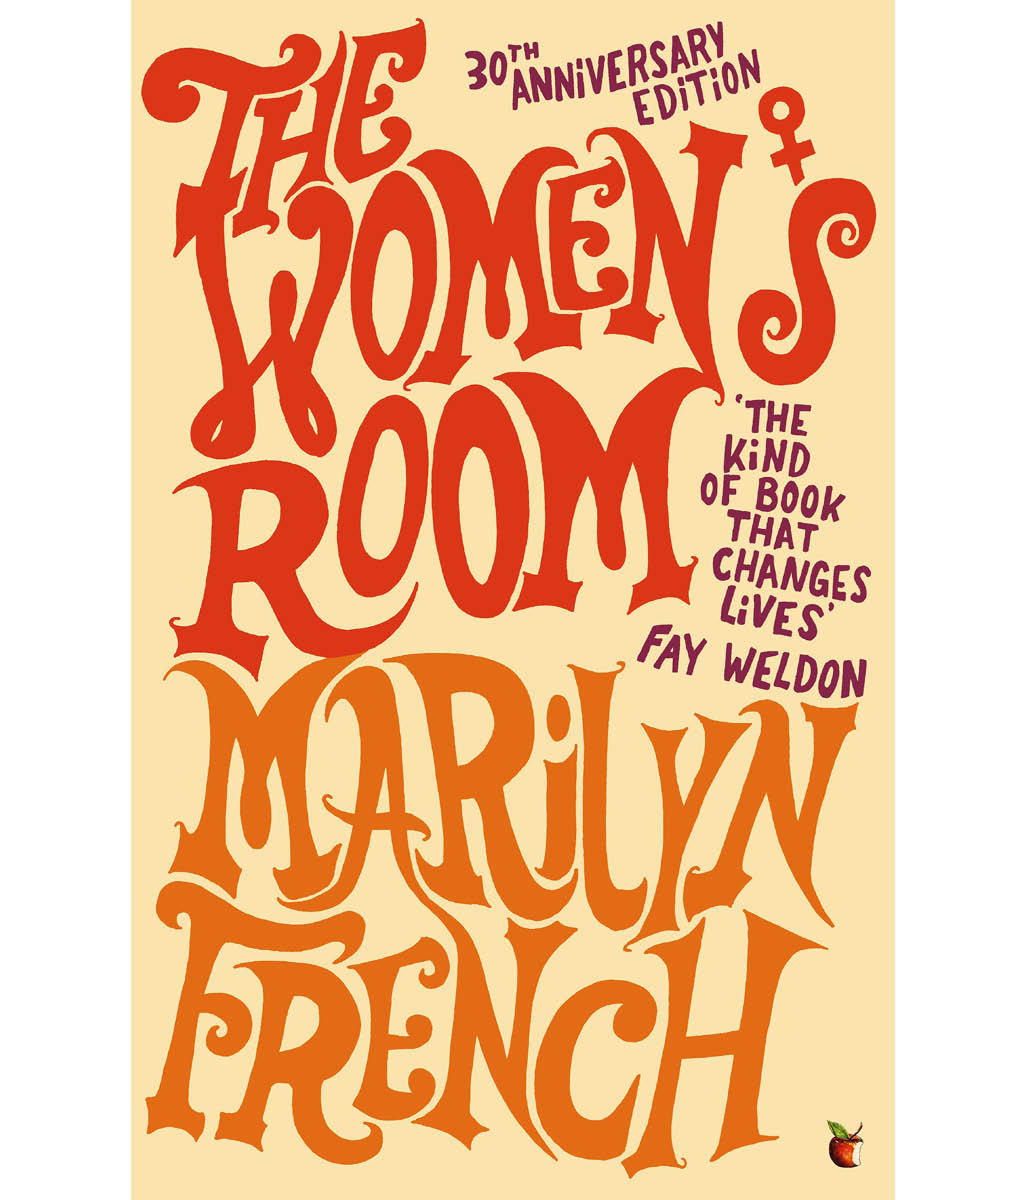 The women&#39;s room by Marilyn French